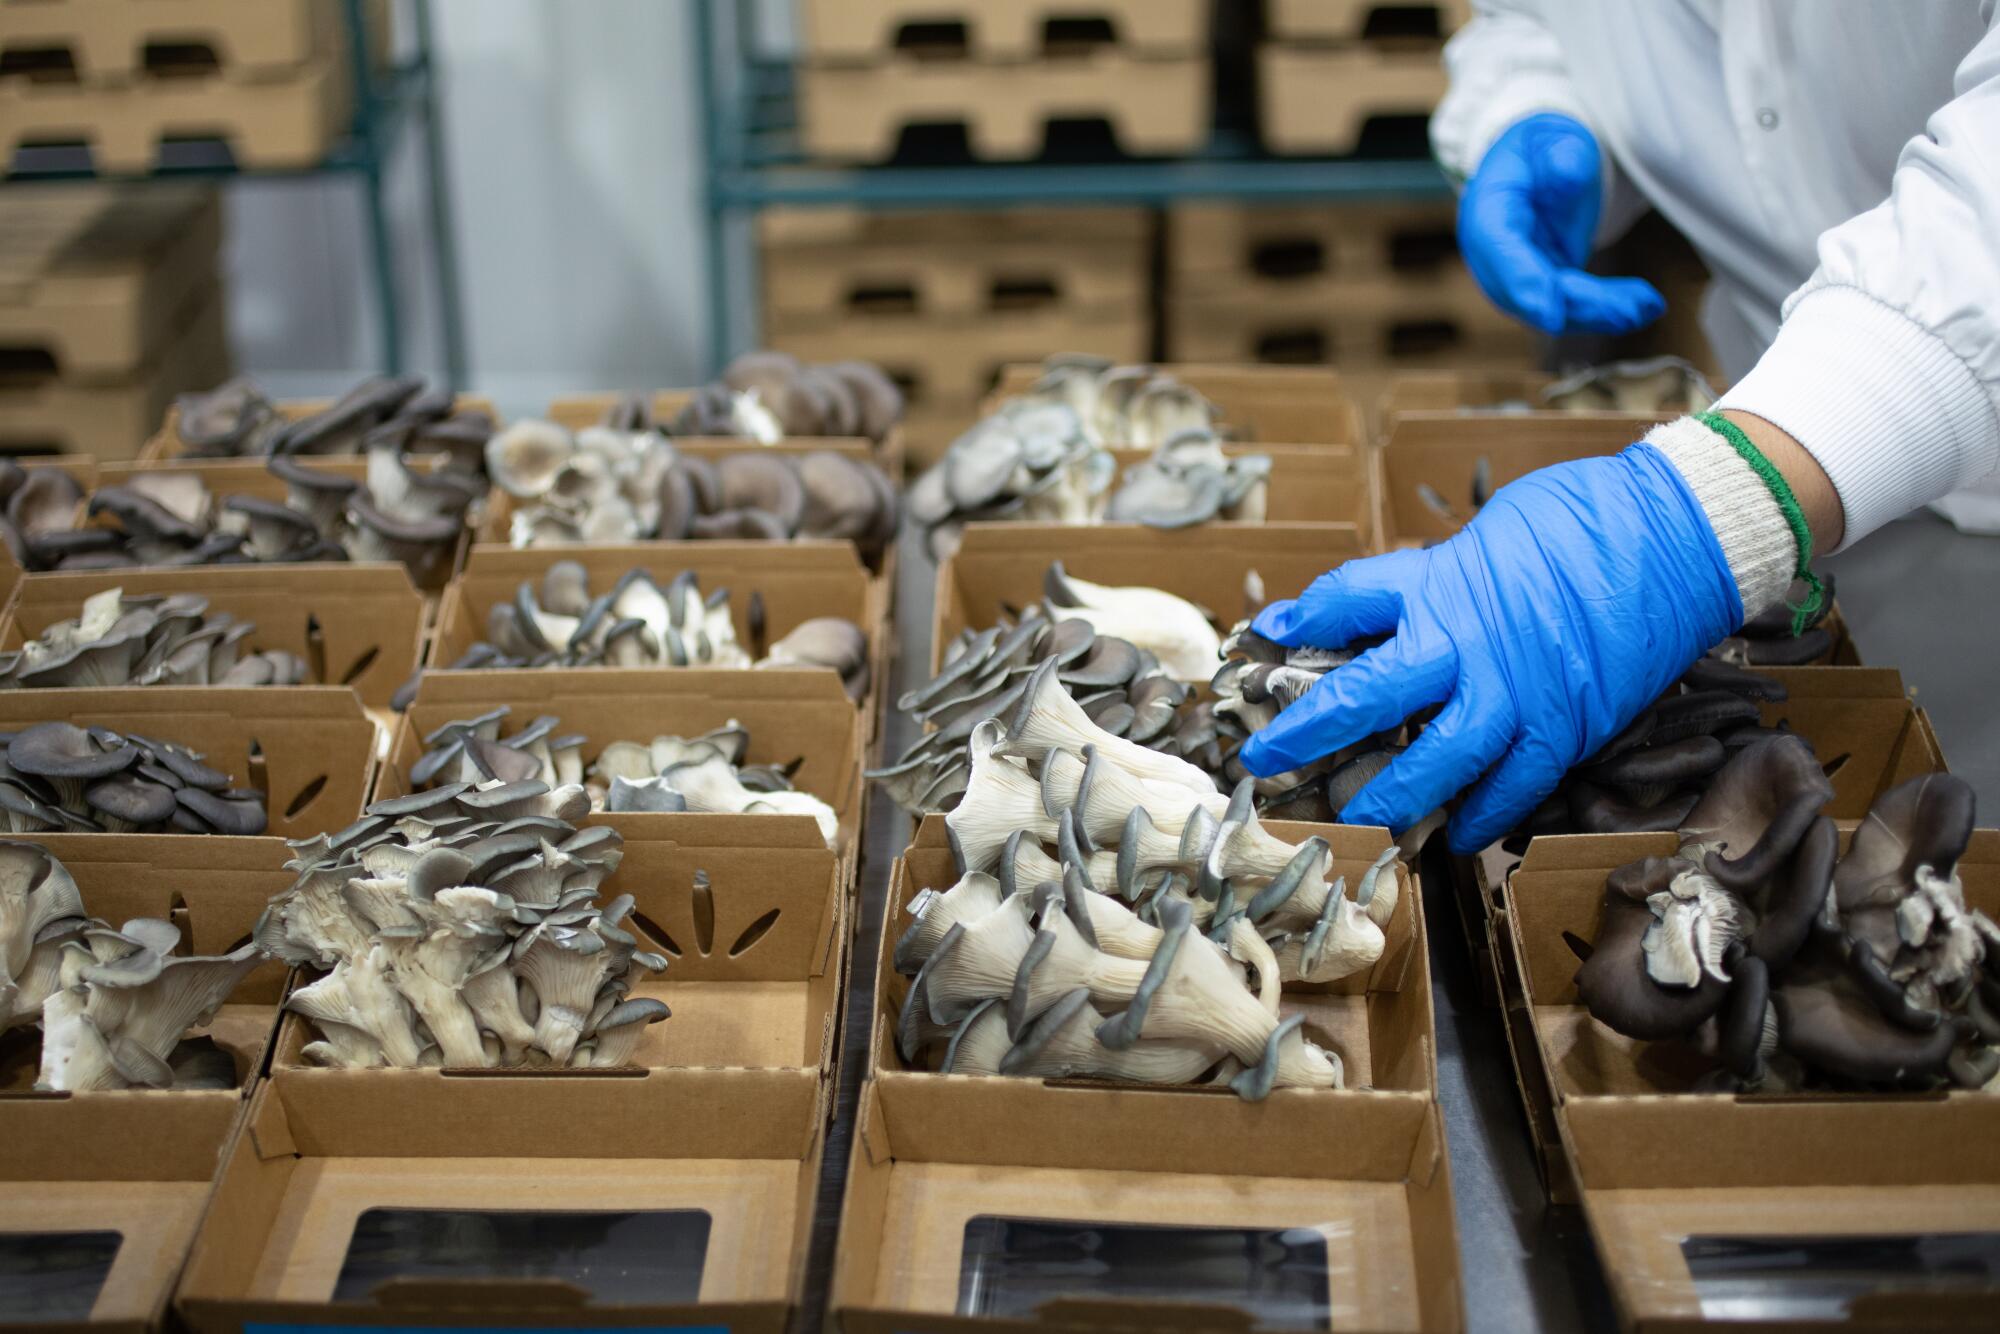 Hands in blue latex gloves place blue oyster mushrooms in paper cartons.